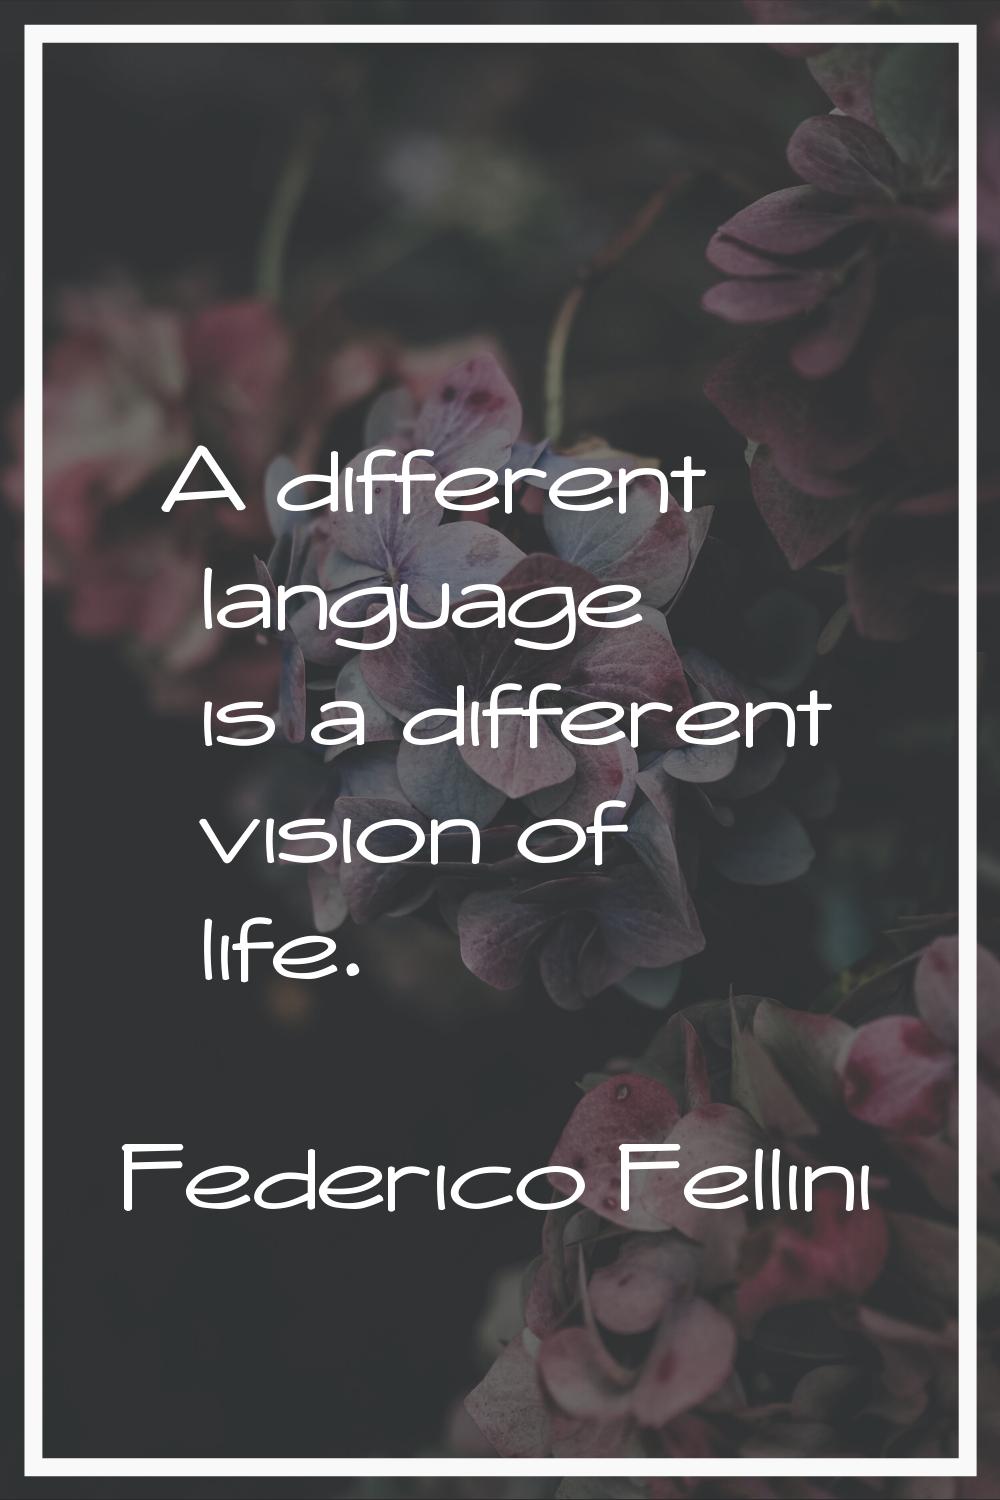 A different language is a different vision of life.